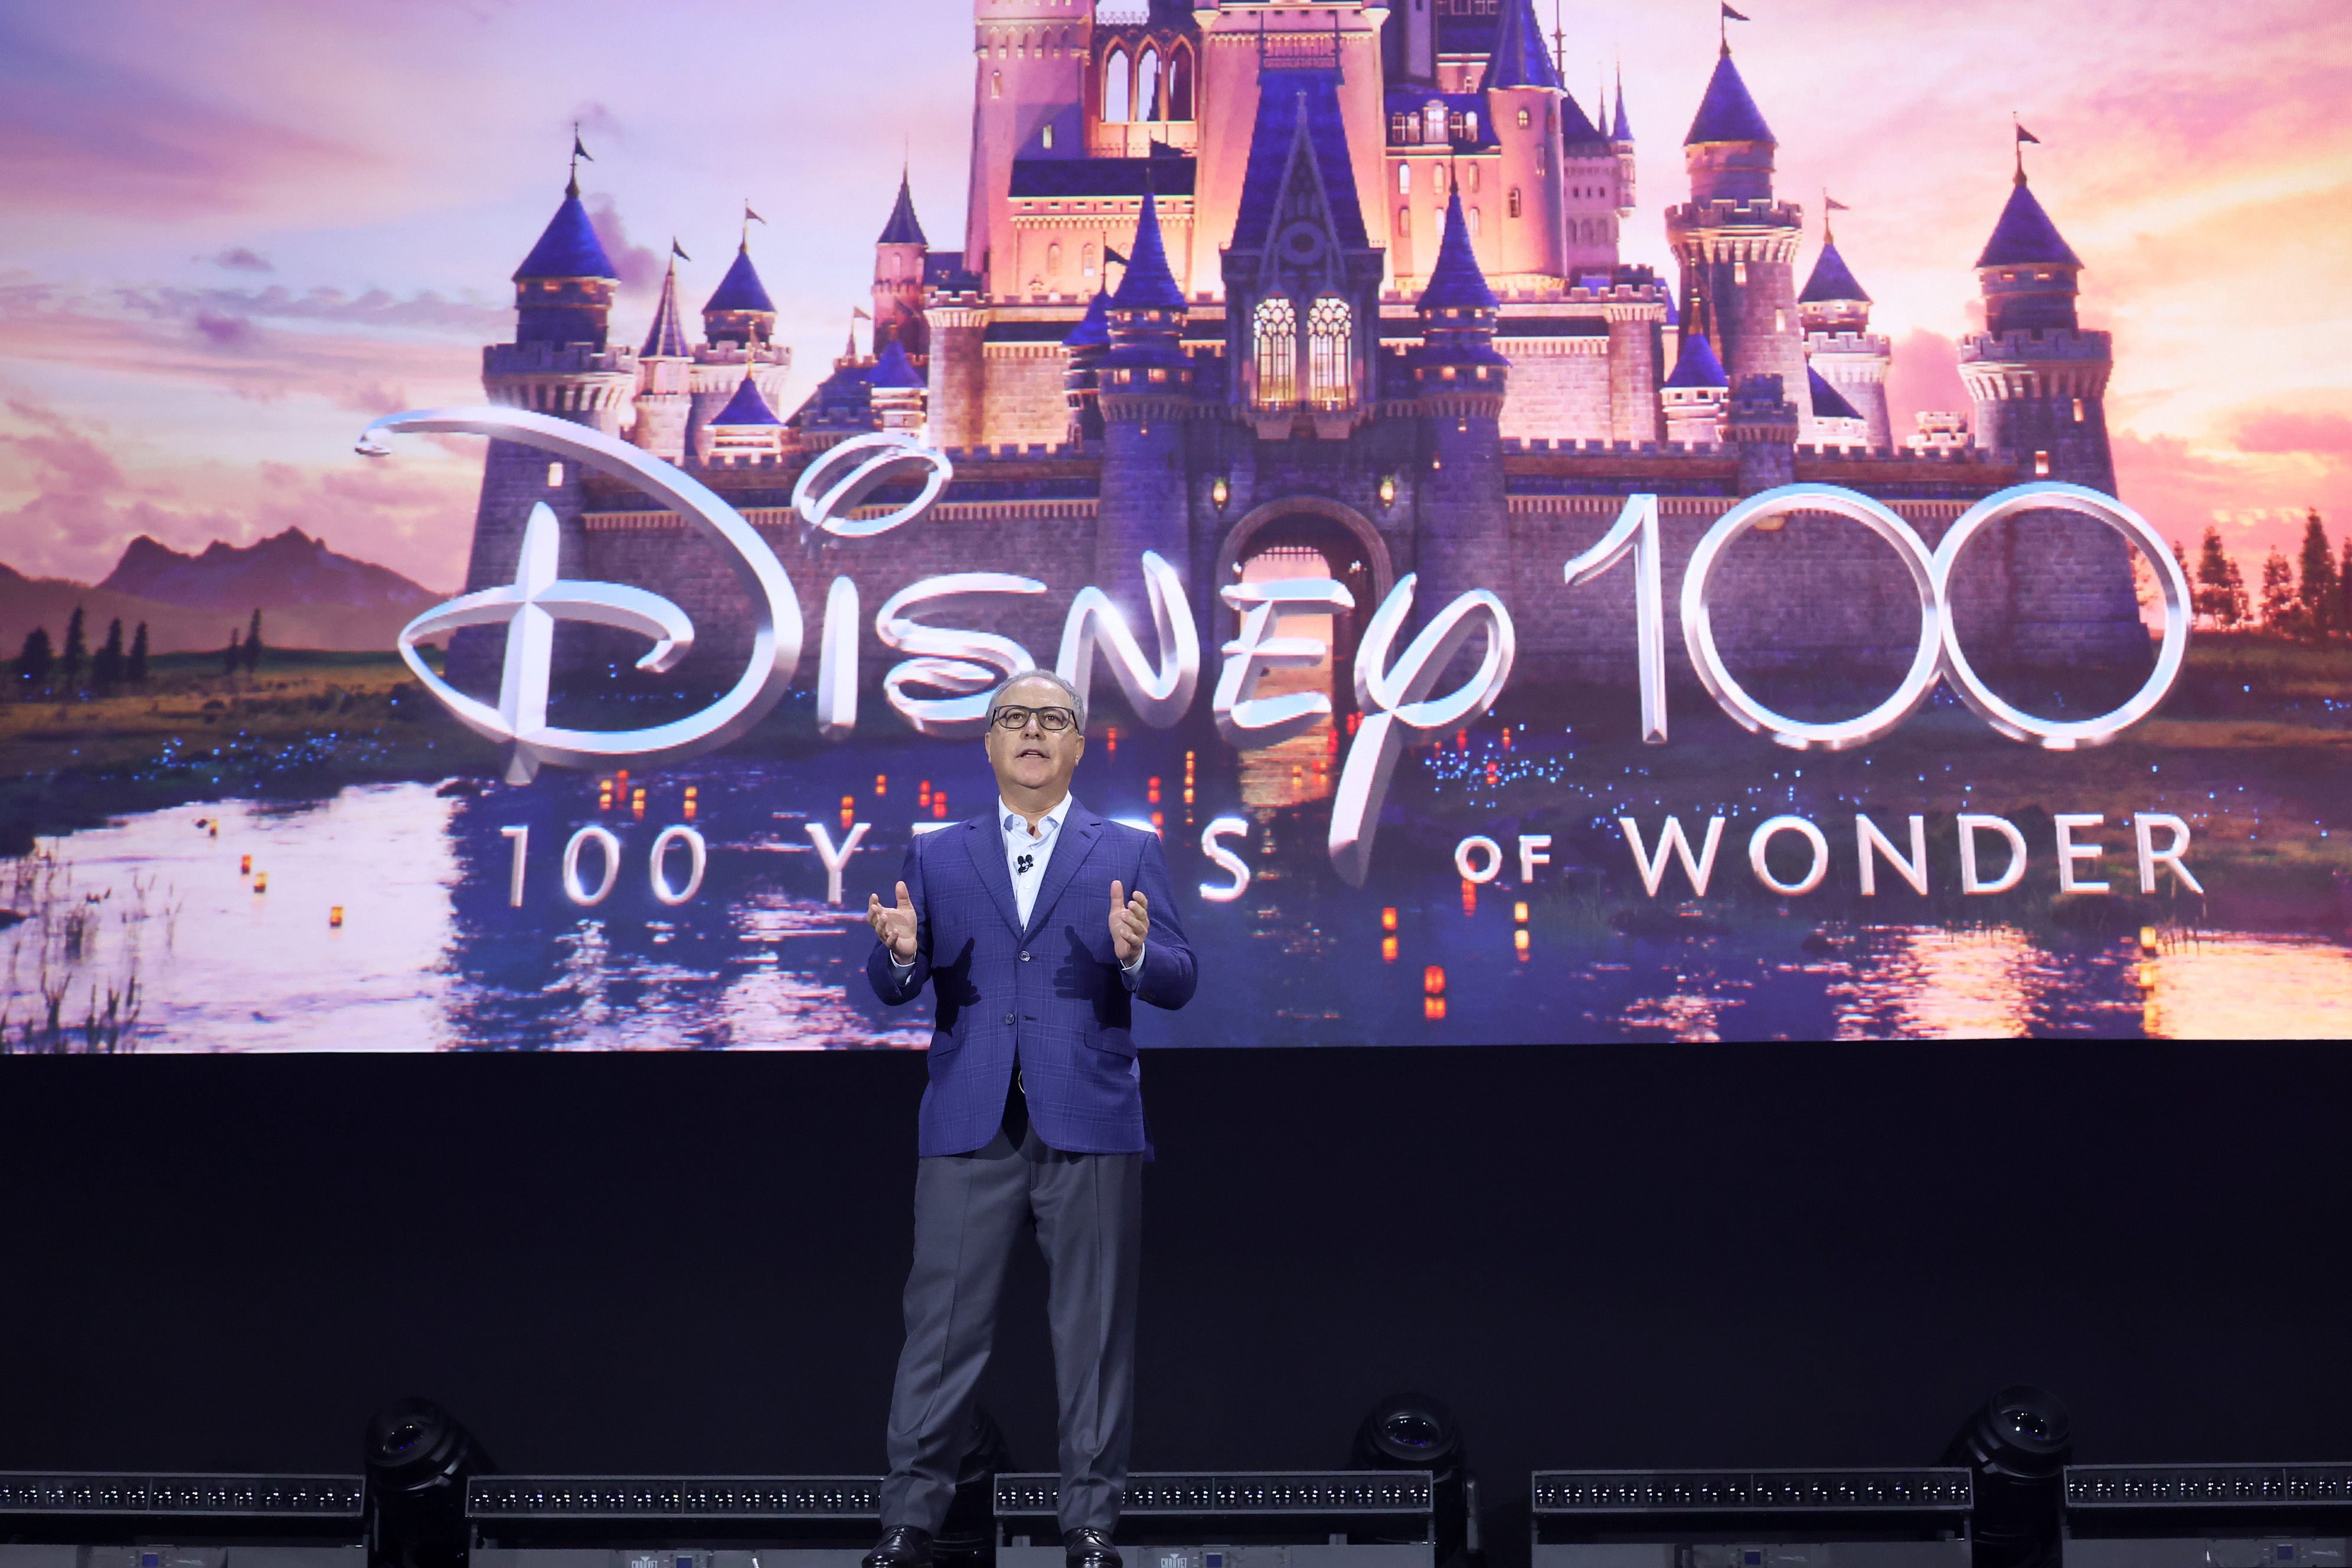 Highlights From D23 - What Disneyland And Disney World Fans Can Expect When They Travel There